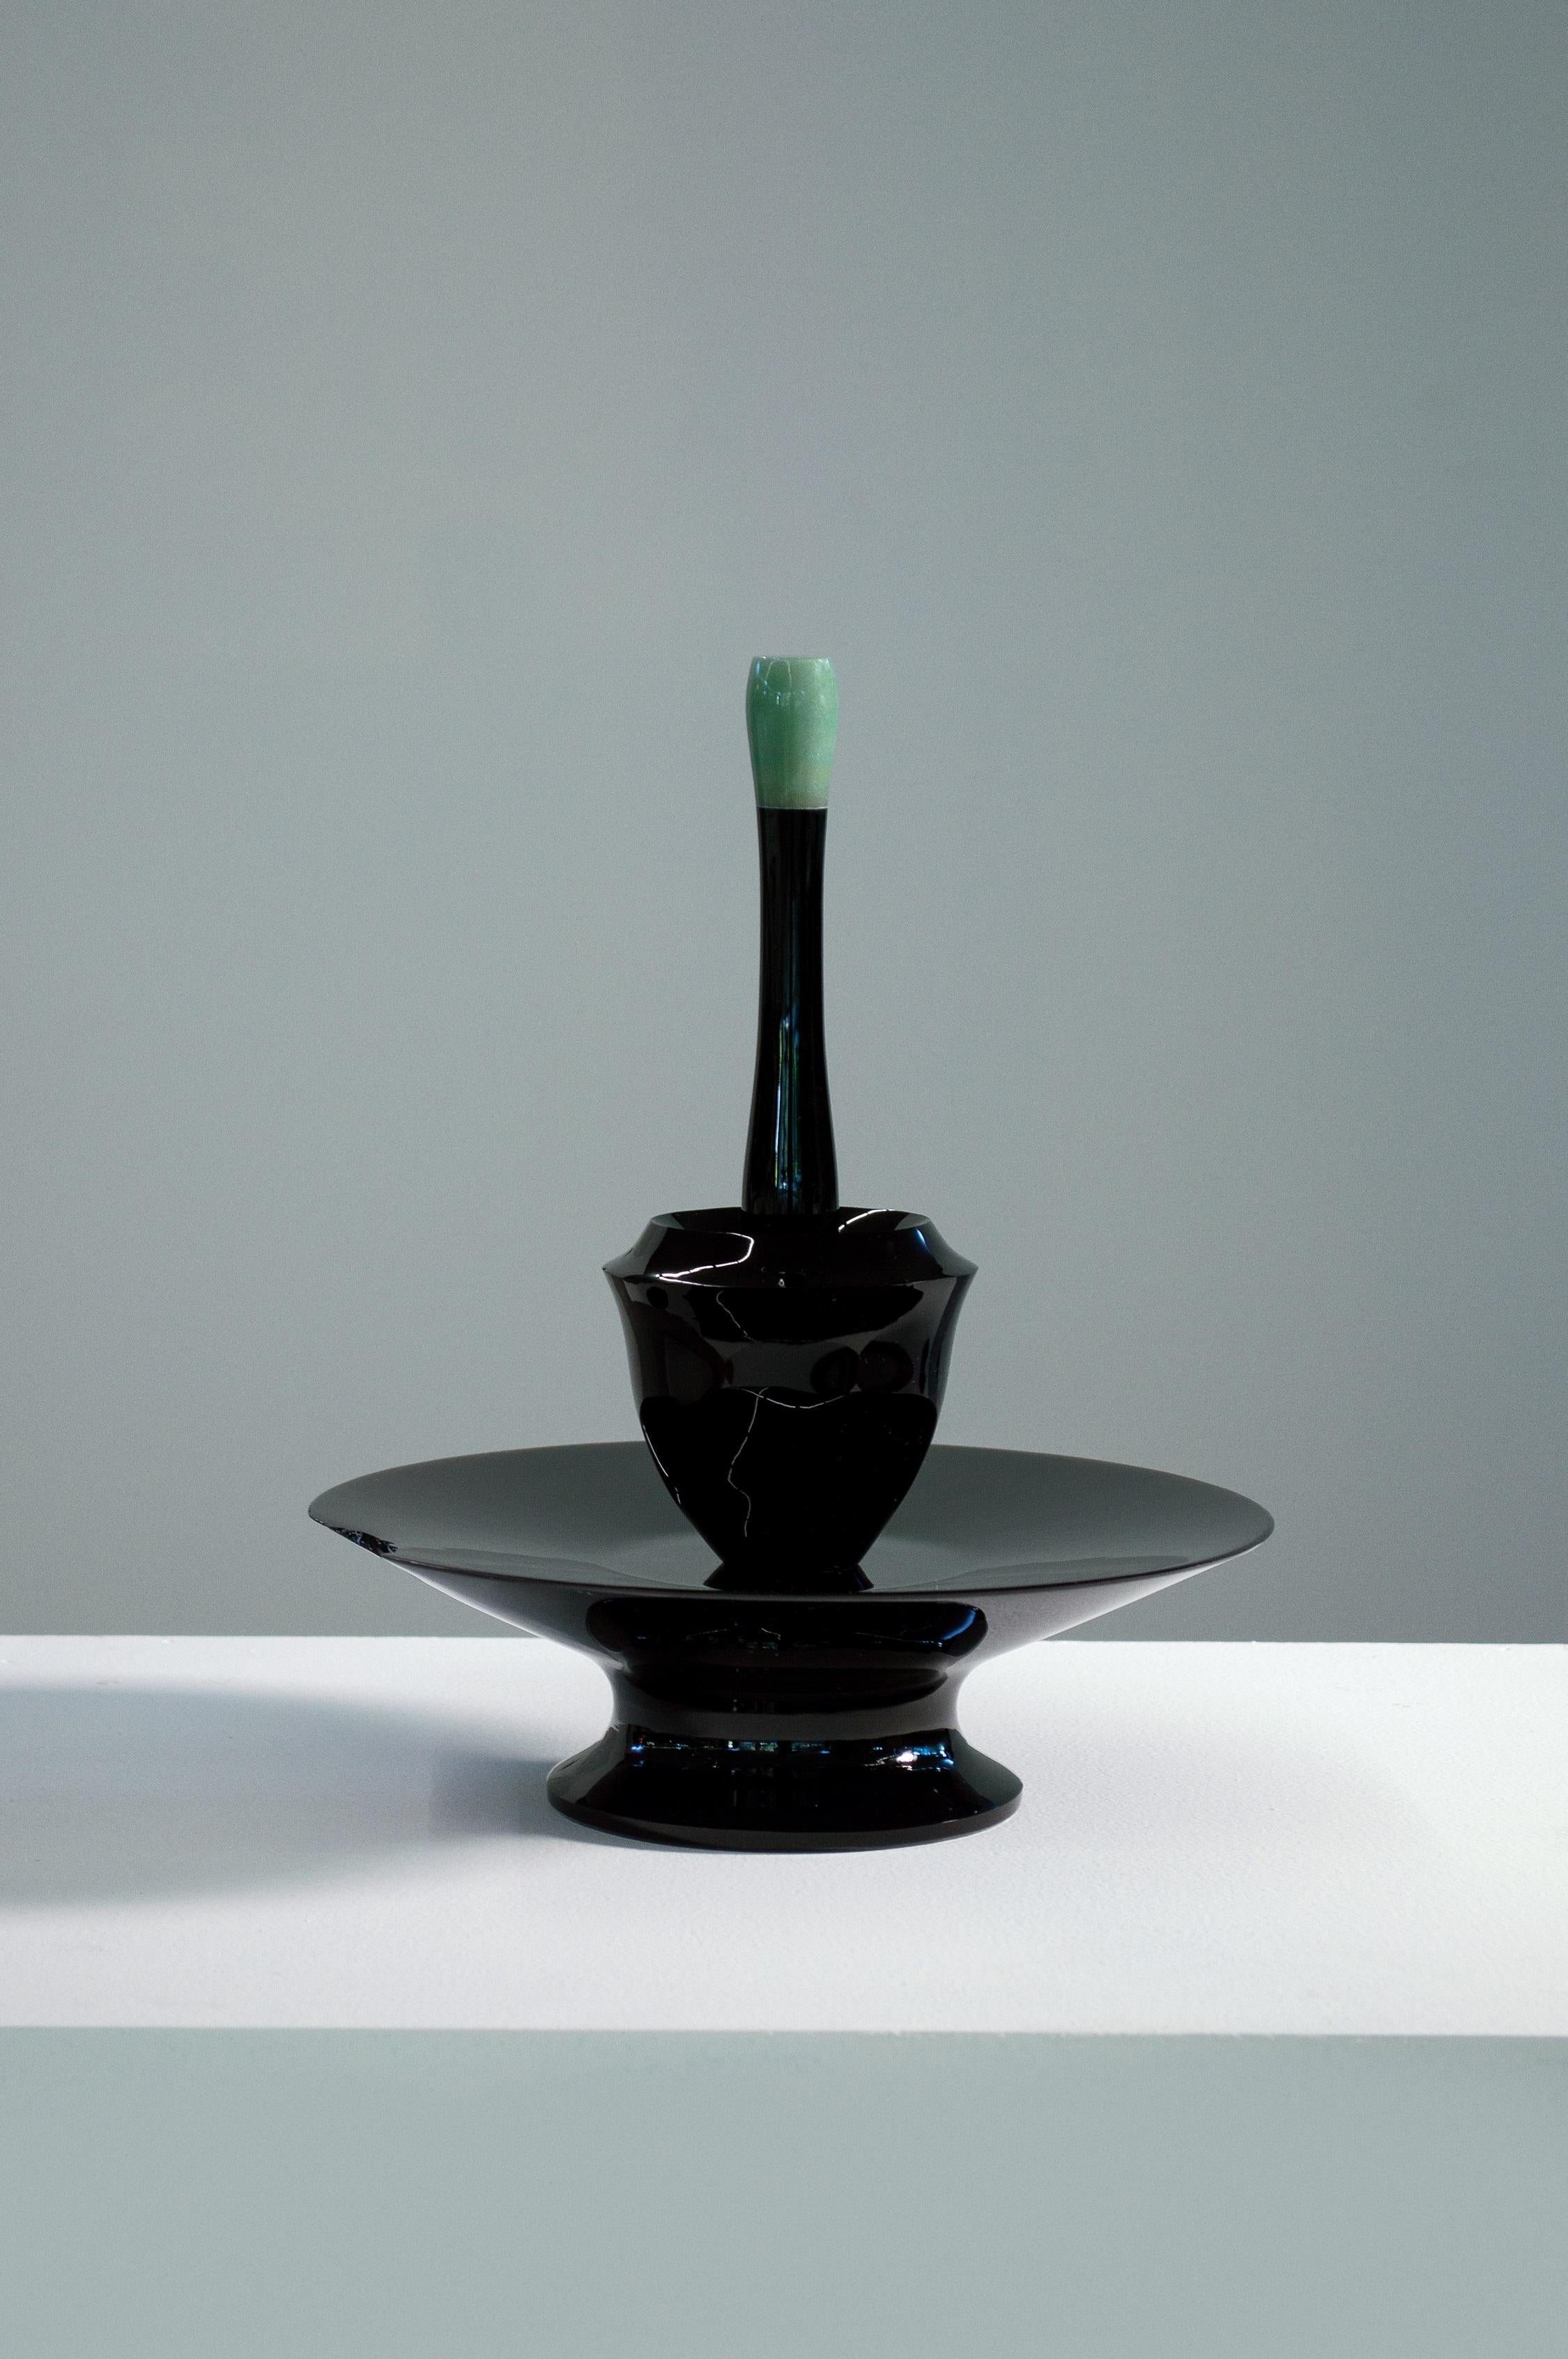 Artefacto C.002.002 sculpture by Acoocooro
Dimensions: ø 27 x H 30 cm.
Materials: Turned obsidian and aventurine (green quartz).
Limited edition.

Artefacto C.002.002, more than any possible exploration of either concept or aesthetics, is a